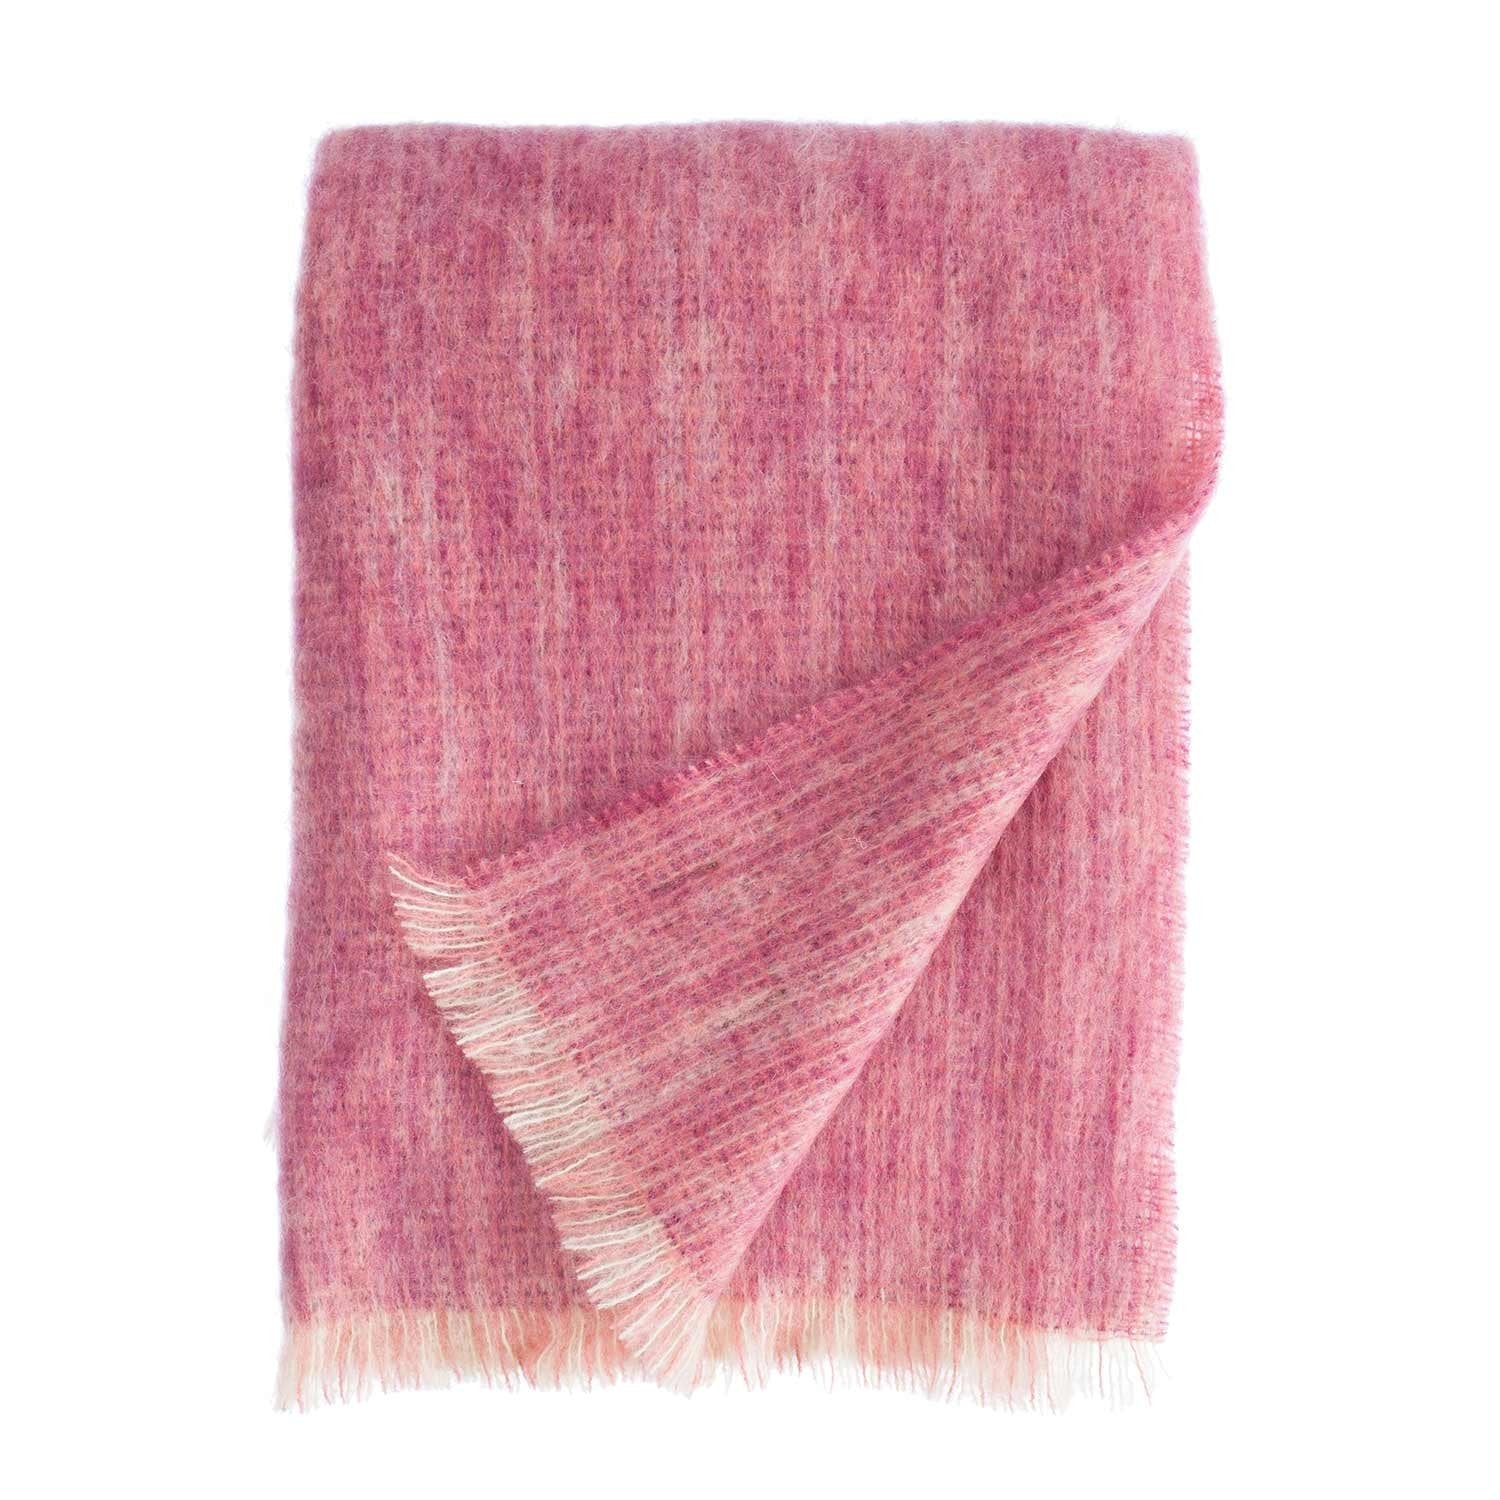 Mohair Throw | Rose Pink & Cream Blanket | The Wool Company